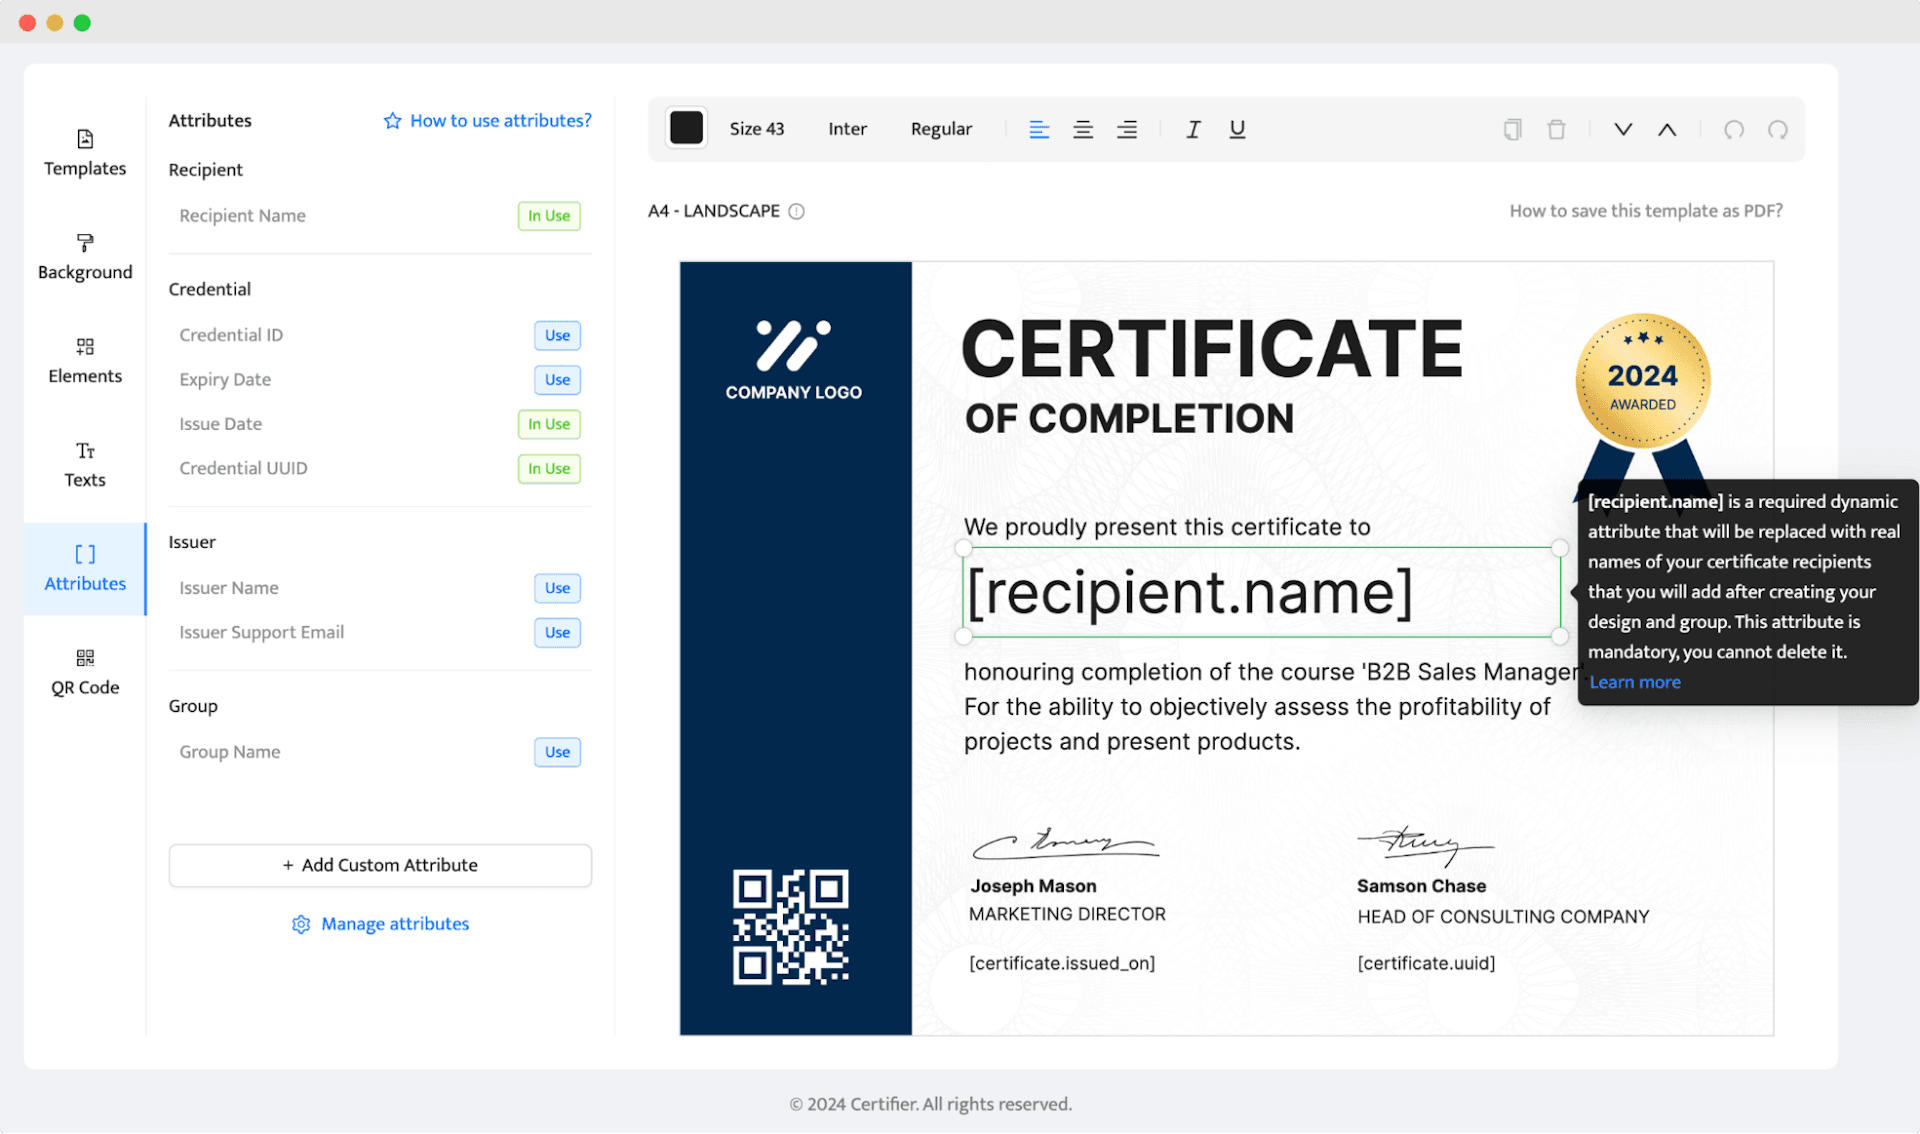 Adding the dynamic attributes to certificate design to generate them in bulk.